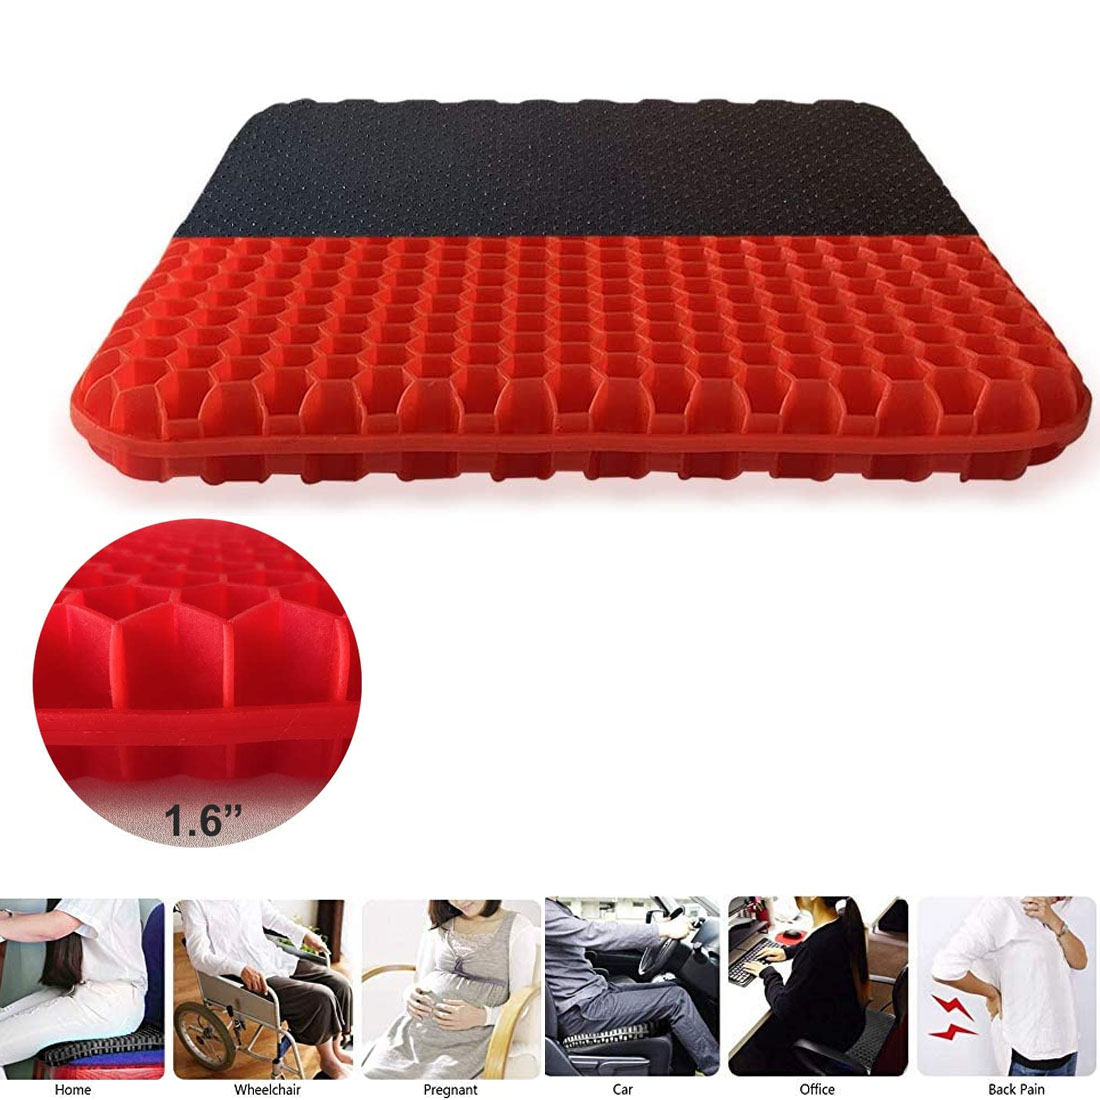 2020 The Latest Large Size Honeycomb Design Cushion Double Thick Seat Cushion with Non-Slip Cover Super Breathable Gel Cushion for Back Painr Home Office Chair Car Wheelchair Black Gel Seat Cushion 